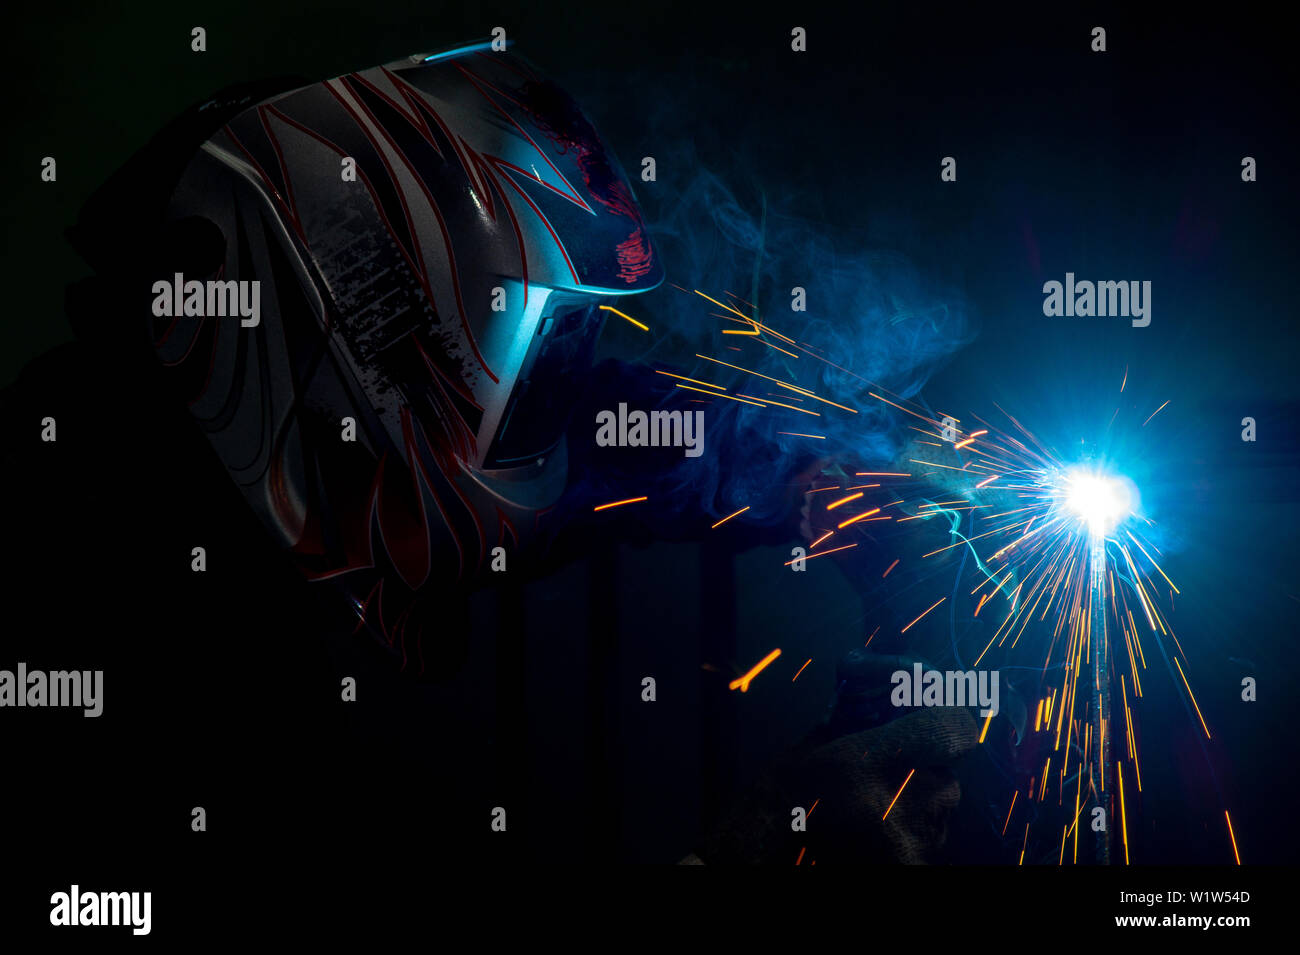 male welder in a mask performing metal welding. photo in dark colors. sparks flying. Stock Photo